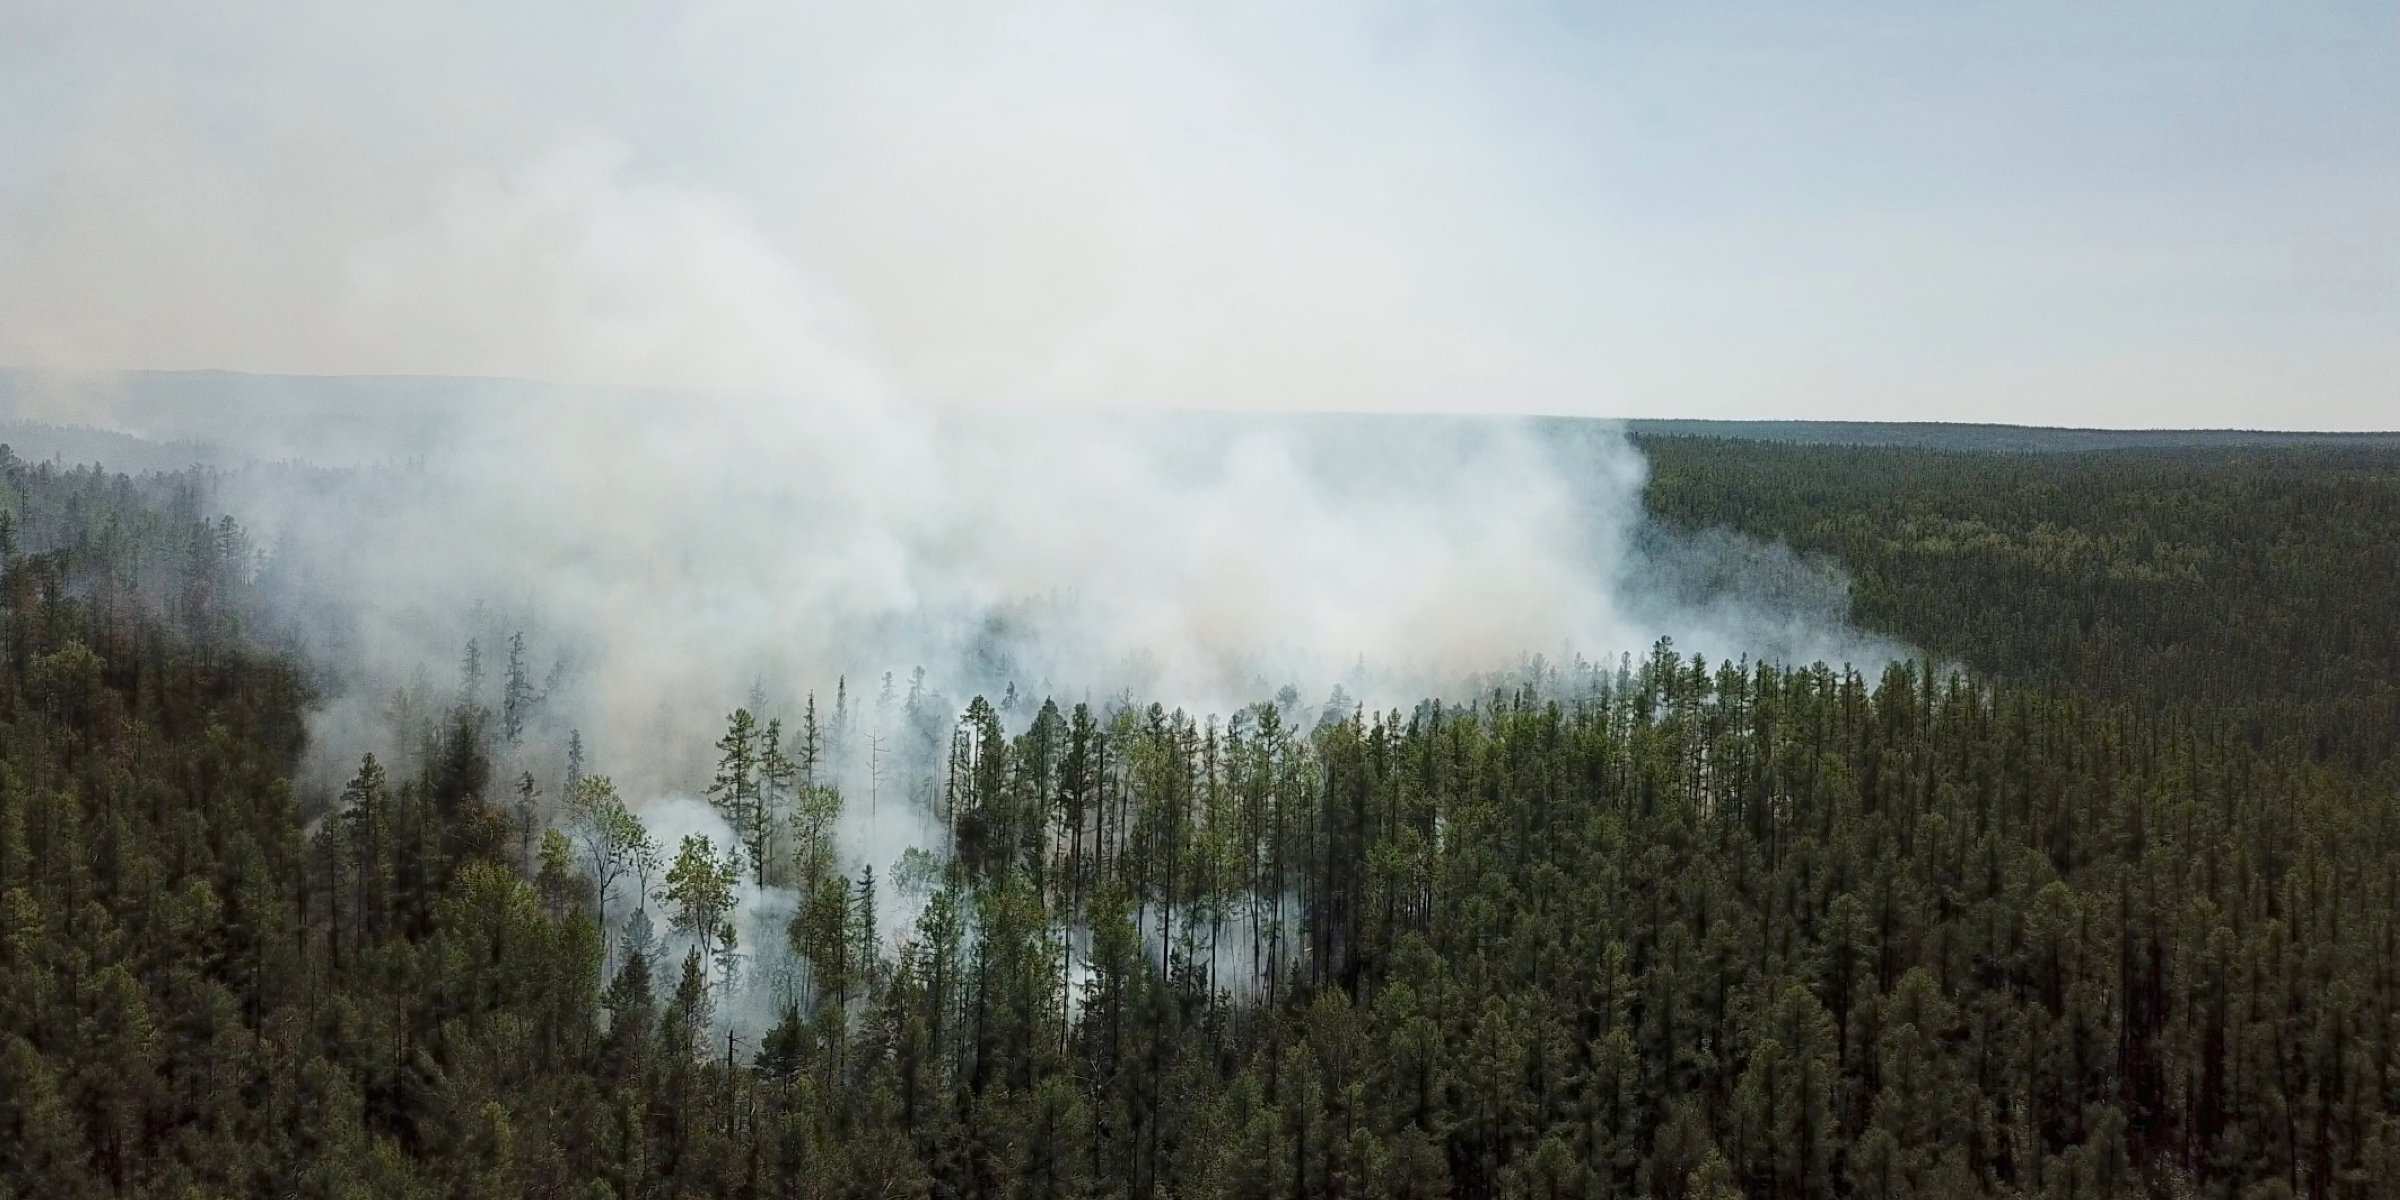 Nearly 300 wildfires in Siberia amid record warm weather | Daily Sabah